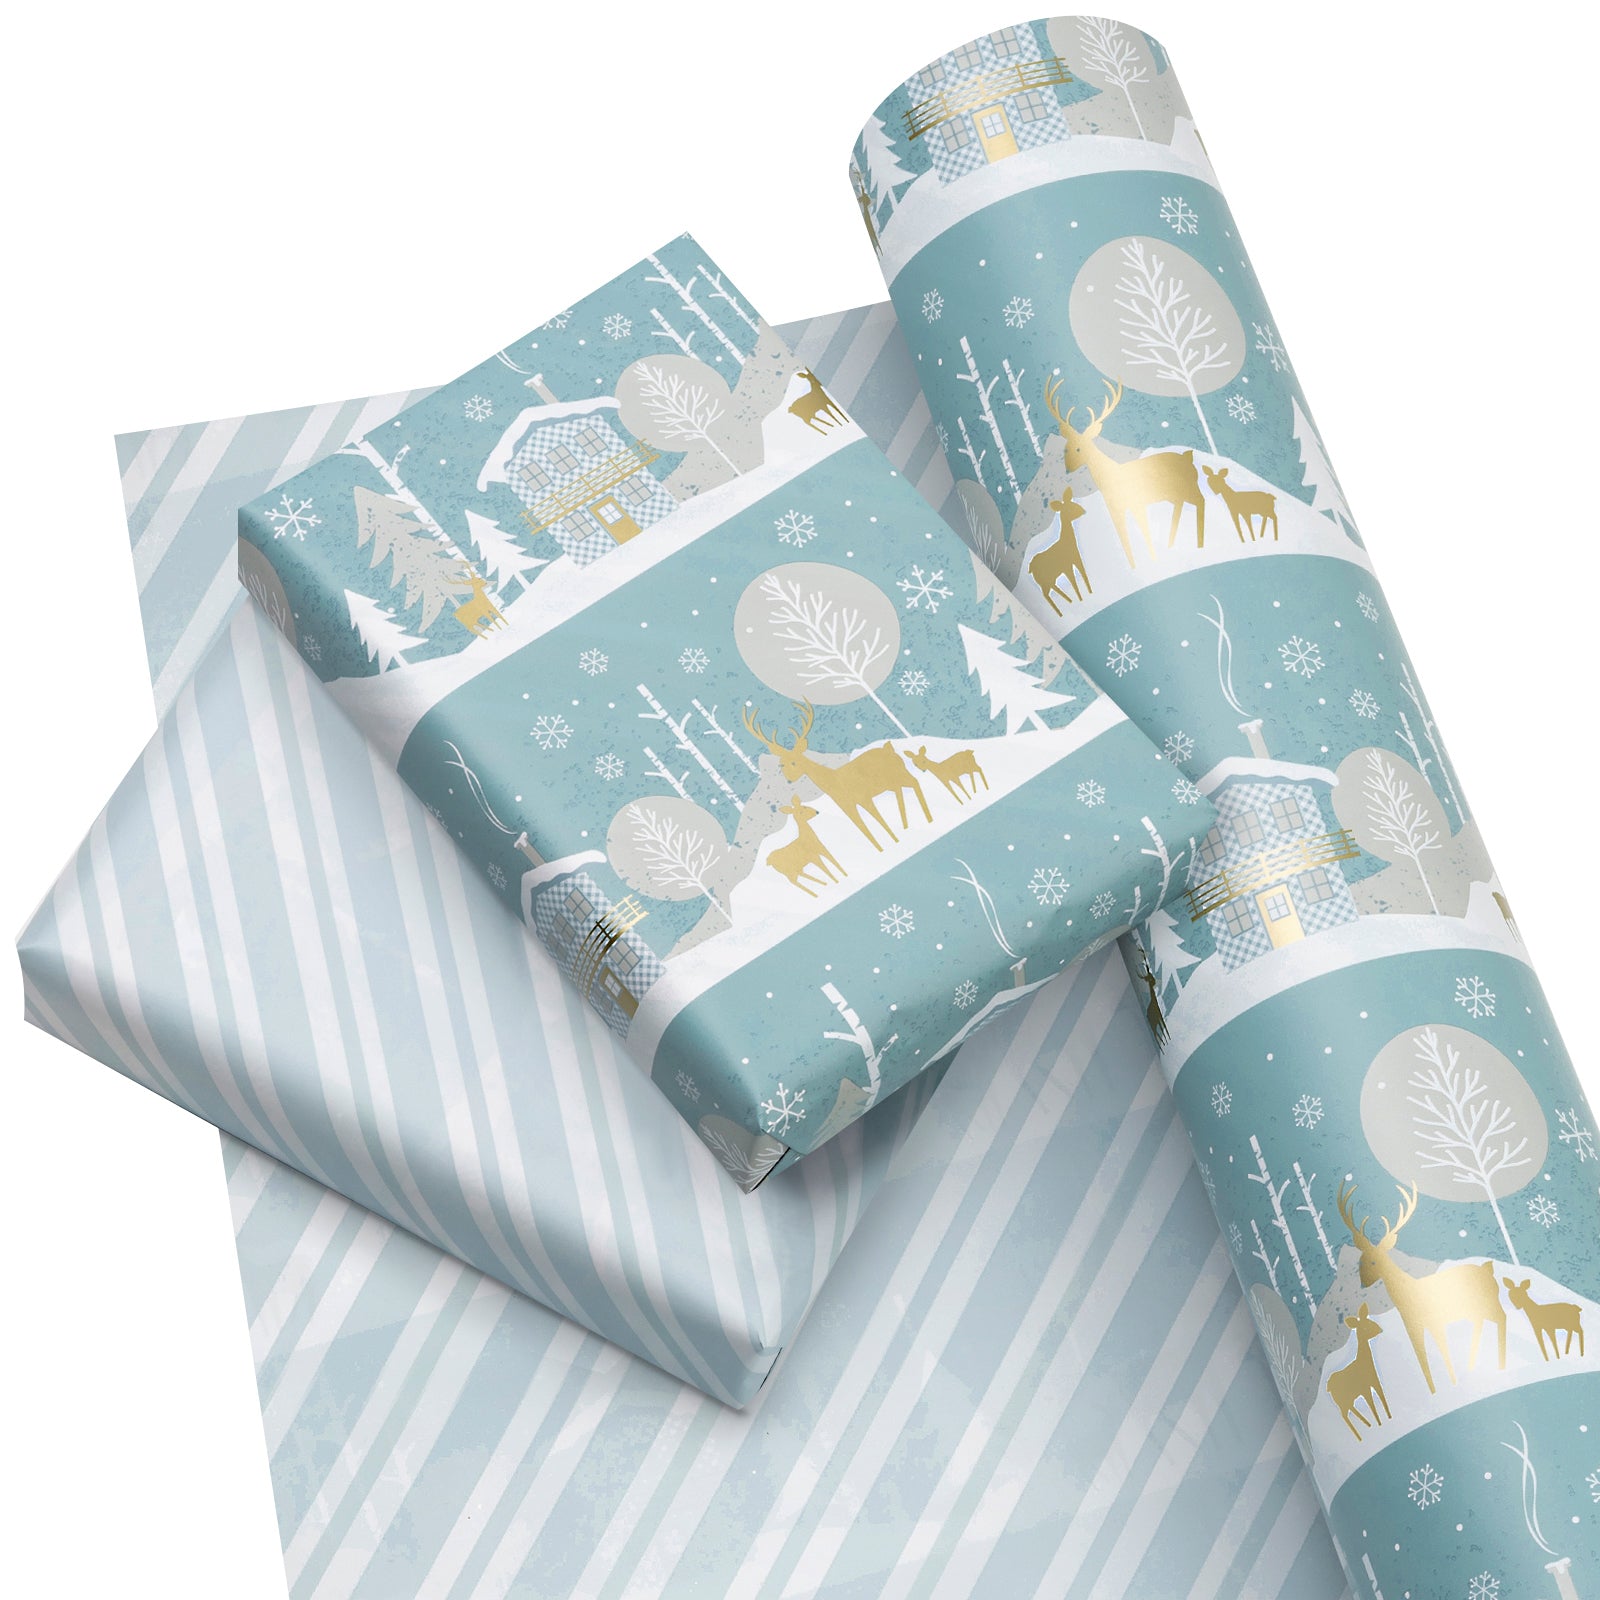 Snow Landscape Wrapping Paper Roll with Blue and White Diagonal Stripes on Reverse Wholesale Wrapholic